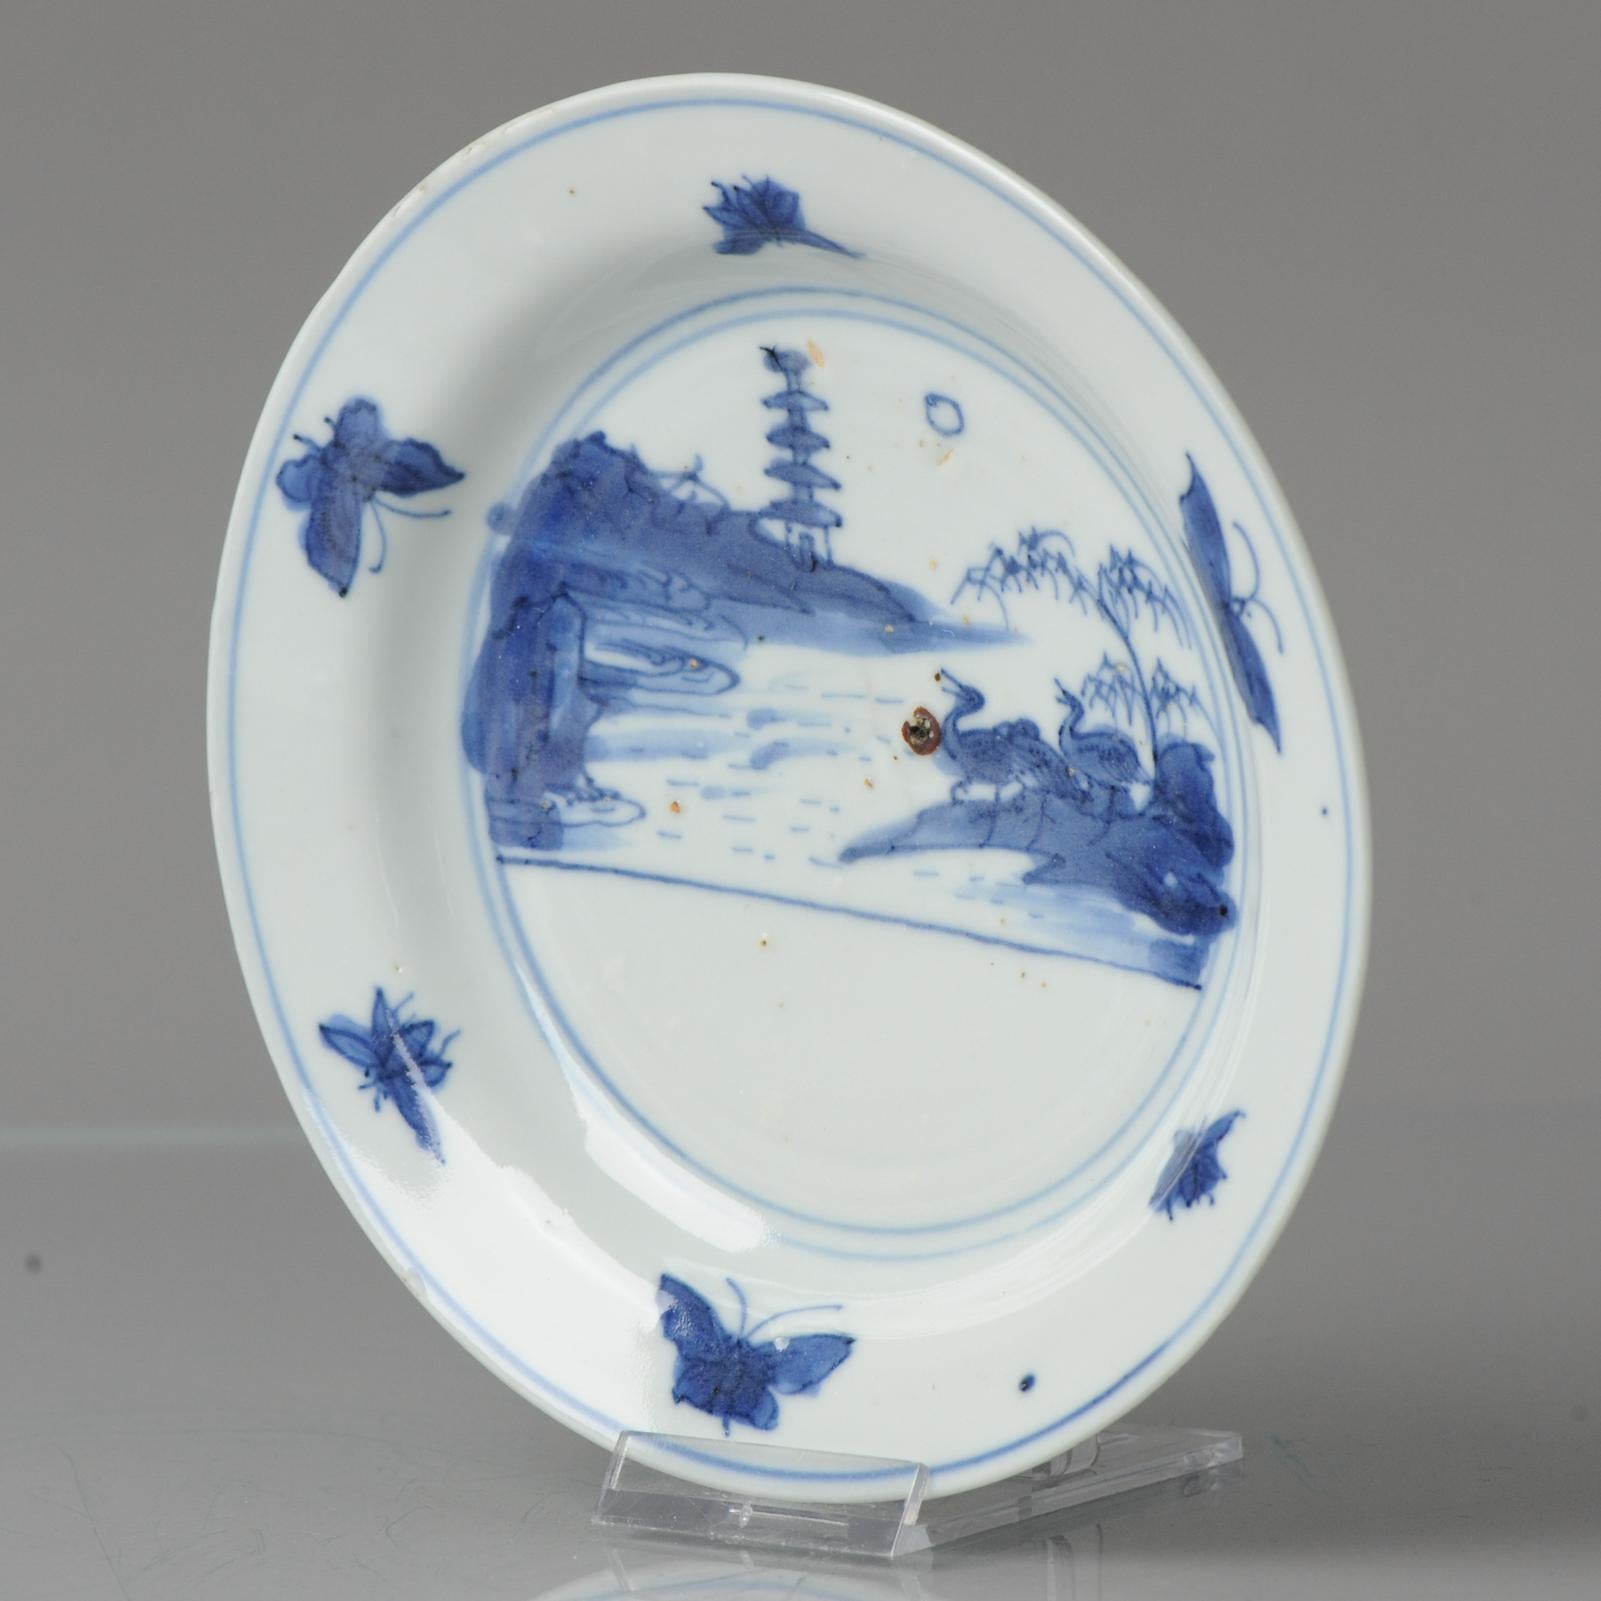 A very nicely decorated Late Ming Blue and White Porcelain Dish with a landscape scene situated in two concentric circles with Ducks/Geese under a pine tree in a mountainious landscape with a pagode in the background. The moon at te sky. The border